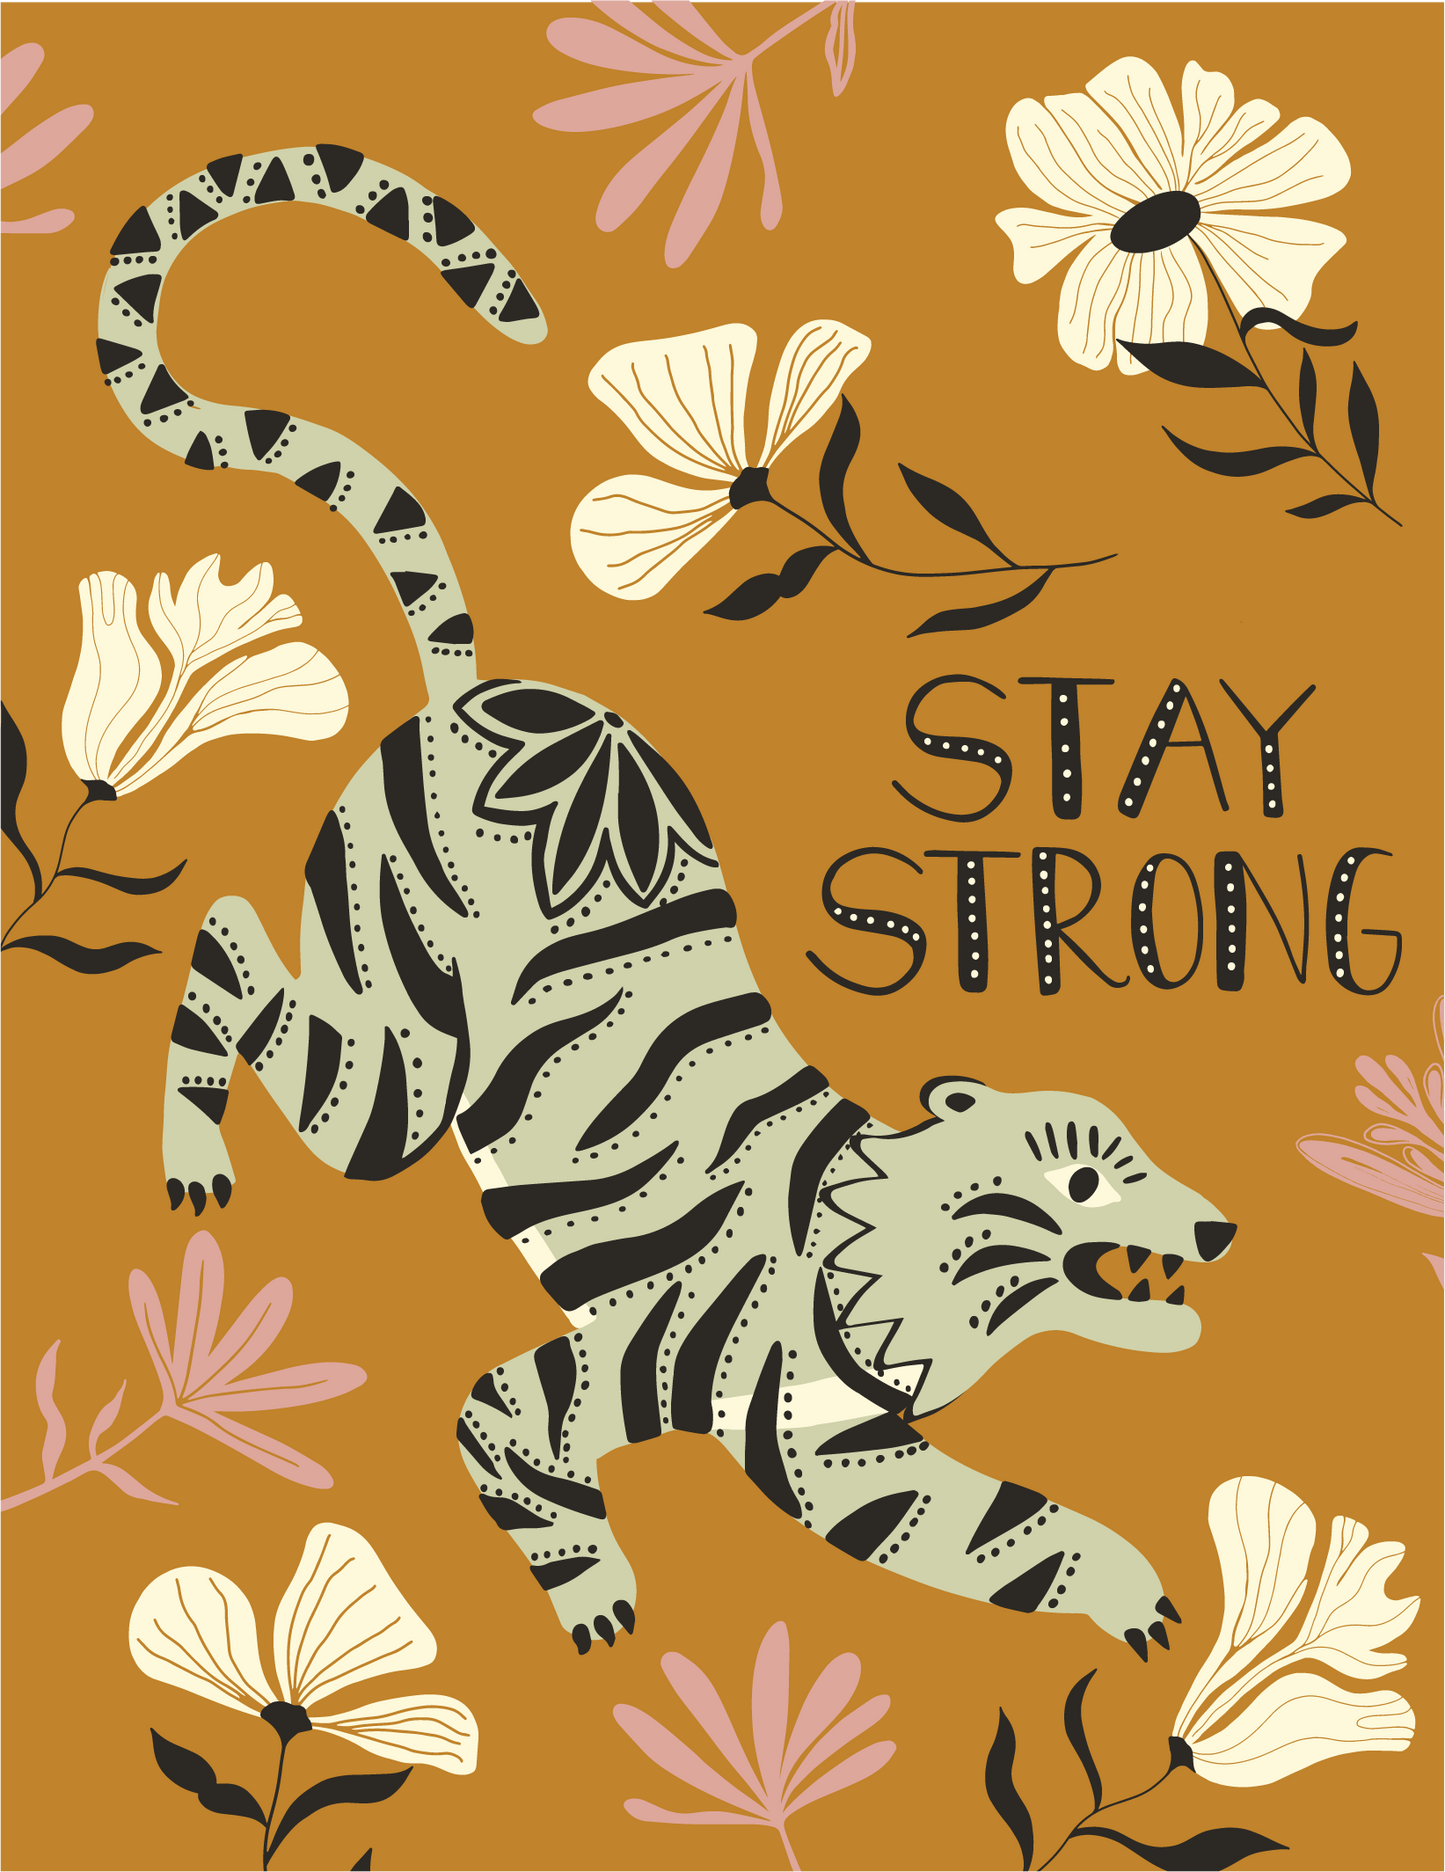 Stay Strong Greeting Card